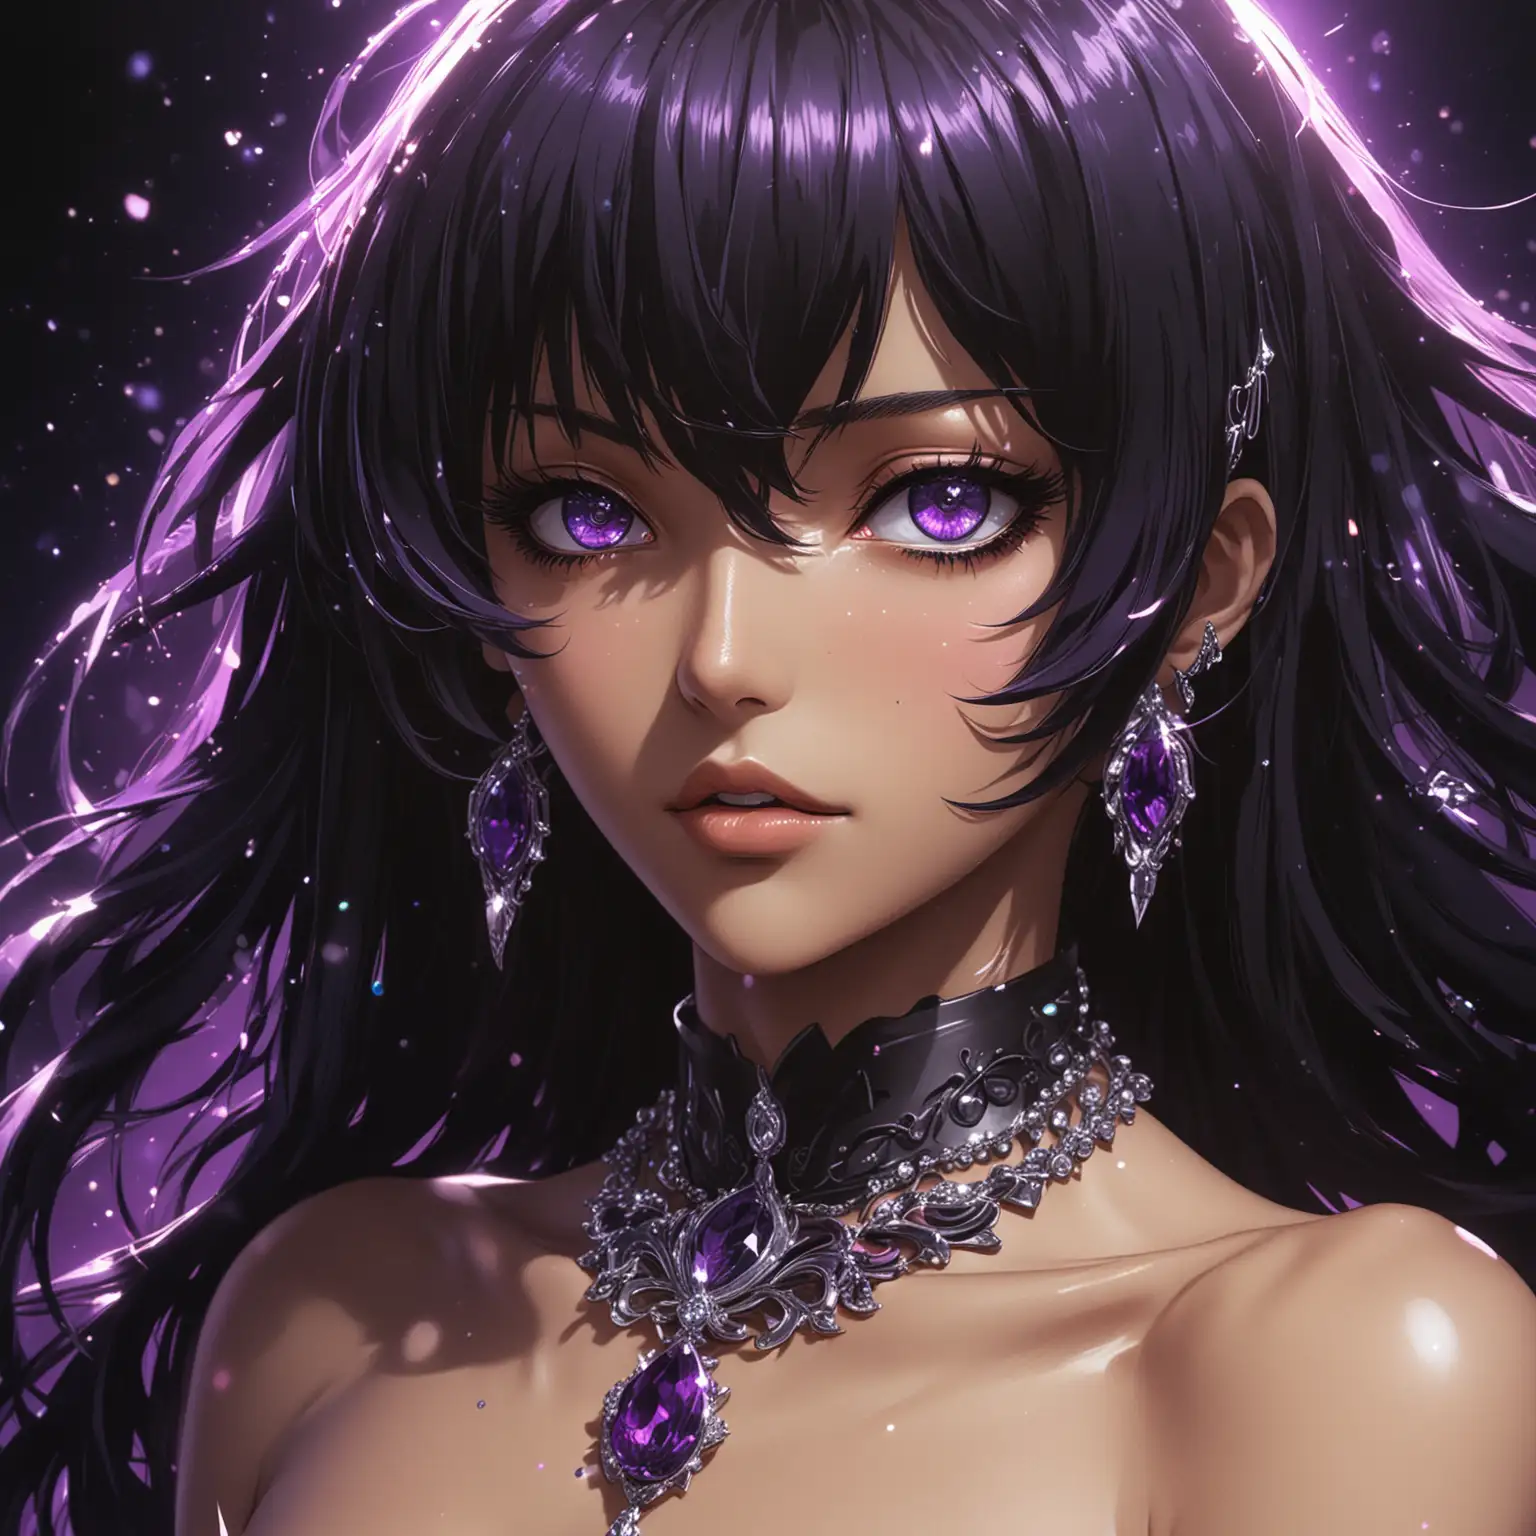 Captivating Anime Character with Vibrant Purple Eyes and Matching Hair